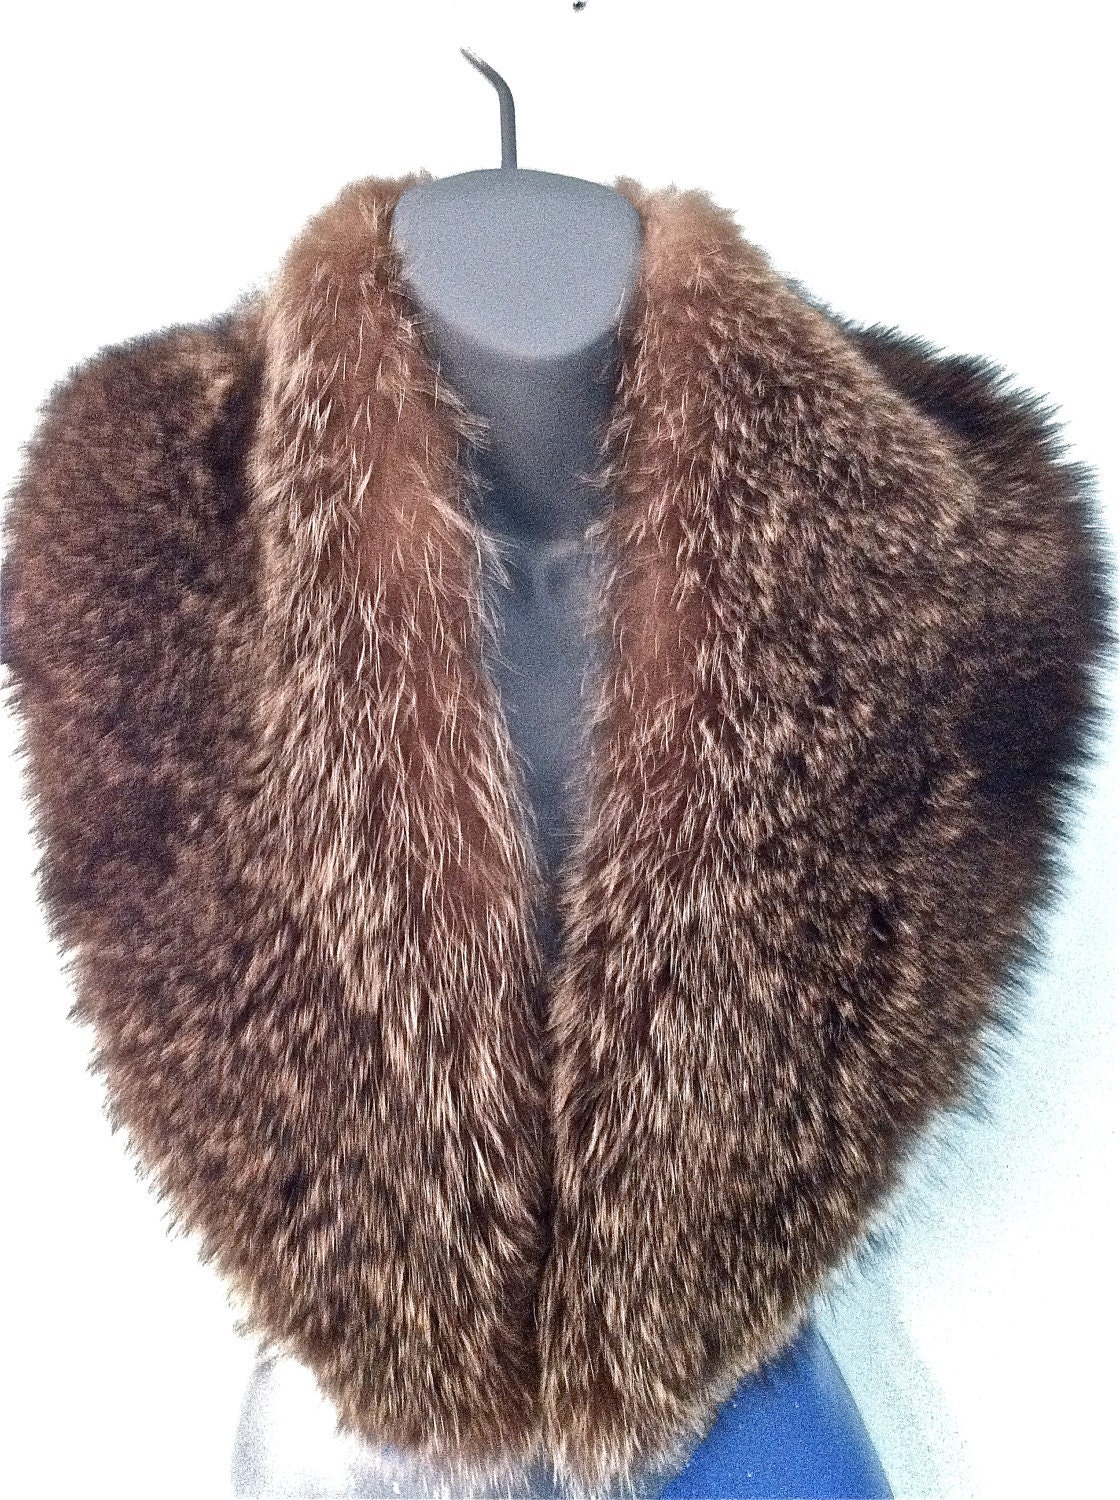 SALE 1930s/1940s Silver Fox Fur Stole Shawl - EXCELLENT Condition - Super PLUSH/Fully Lined